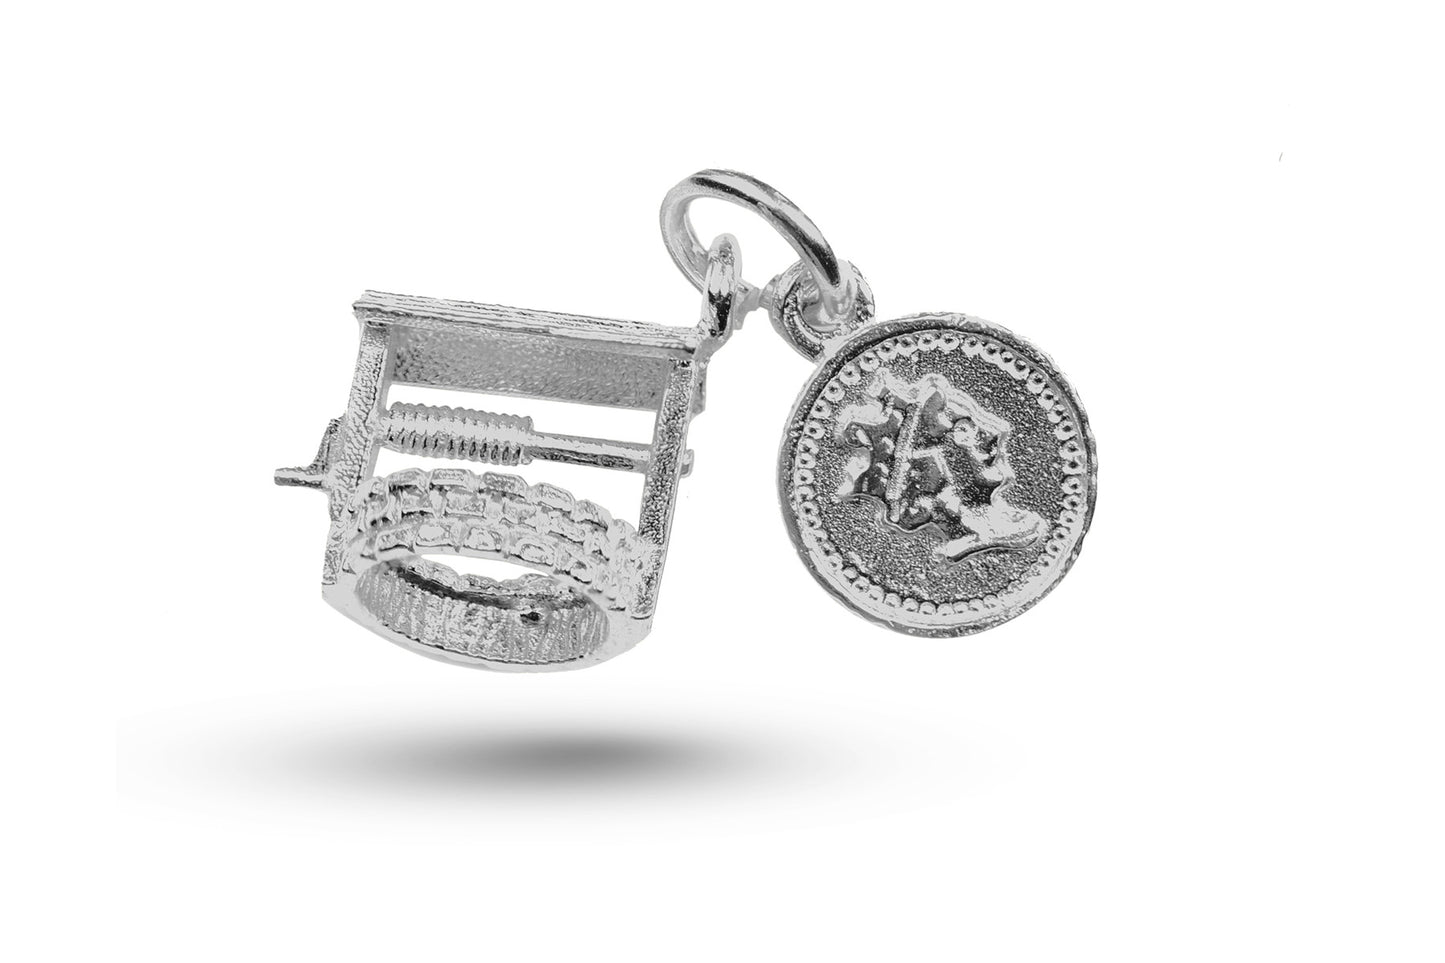 White gold Coin and Wishing Well charm.